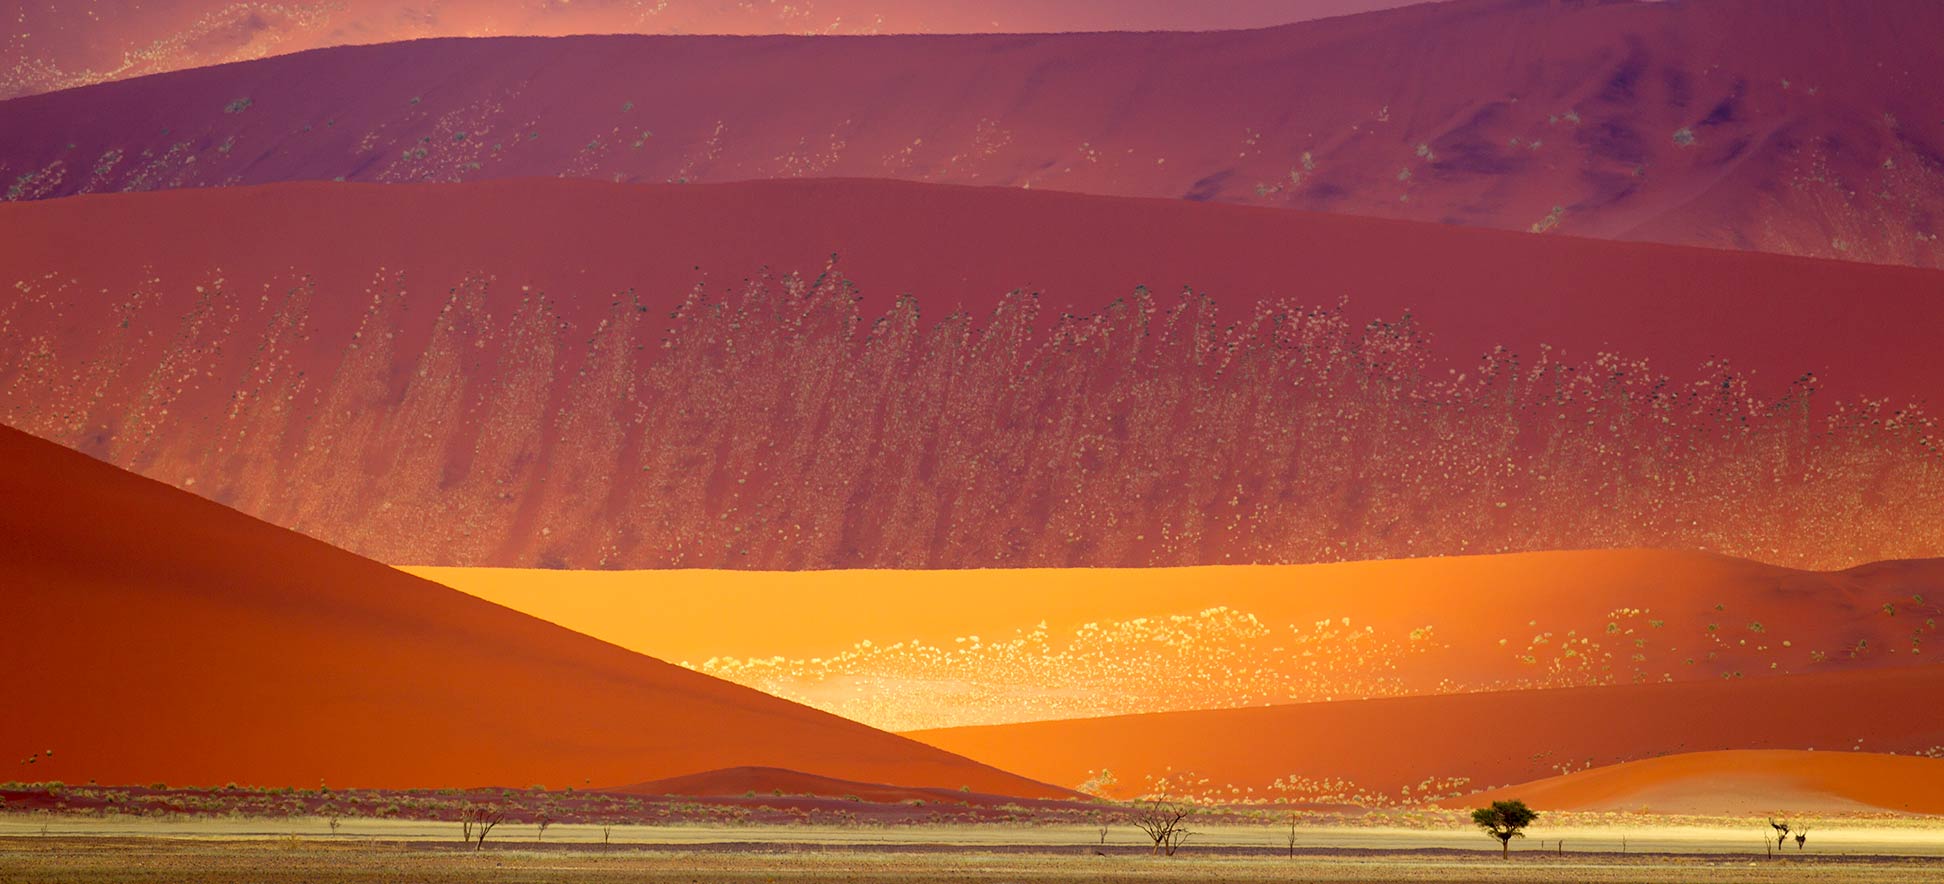 Sand dunes in the Namib-Naukluft National Park in Namibia